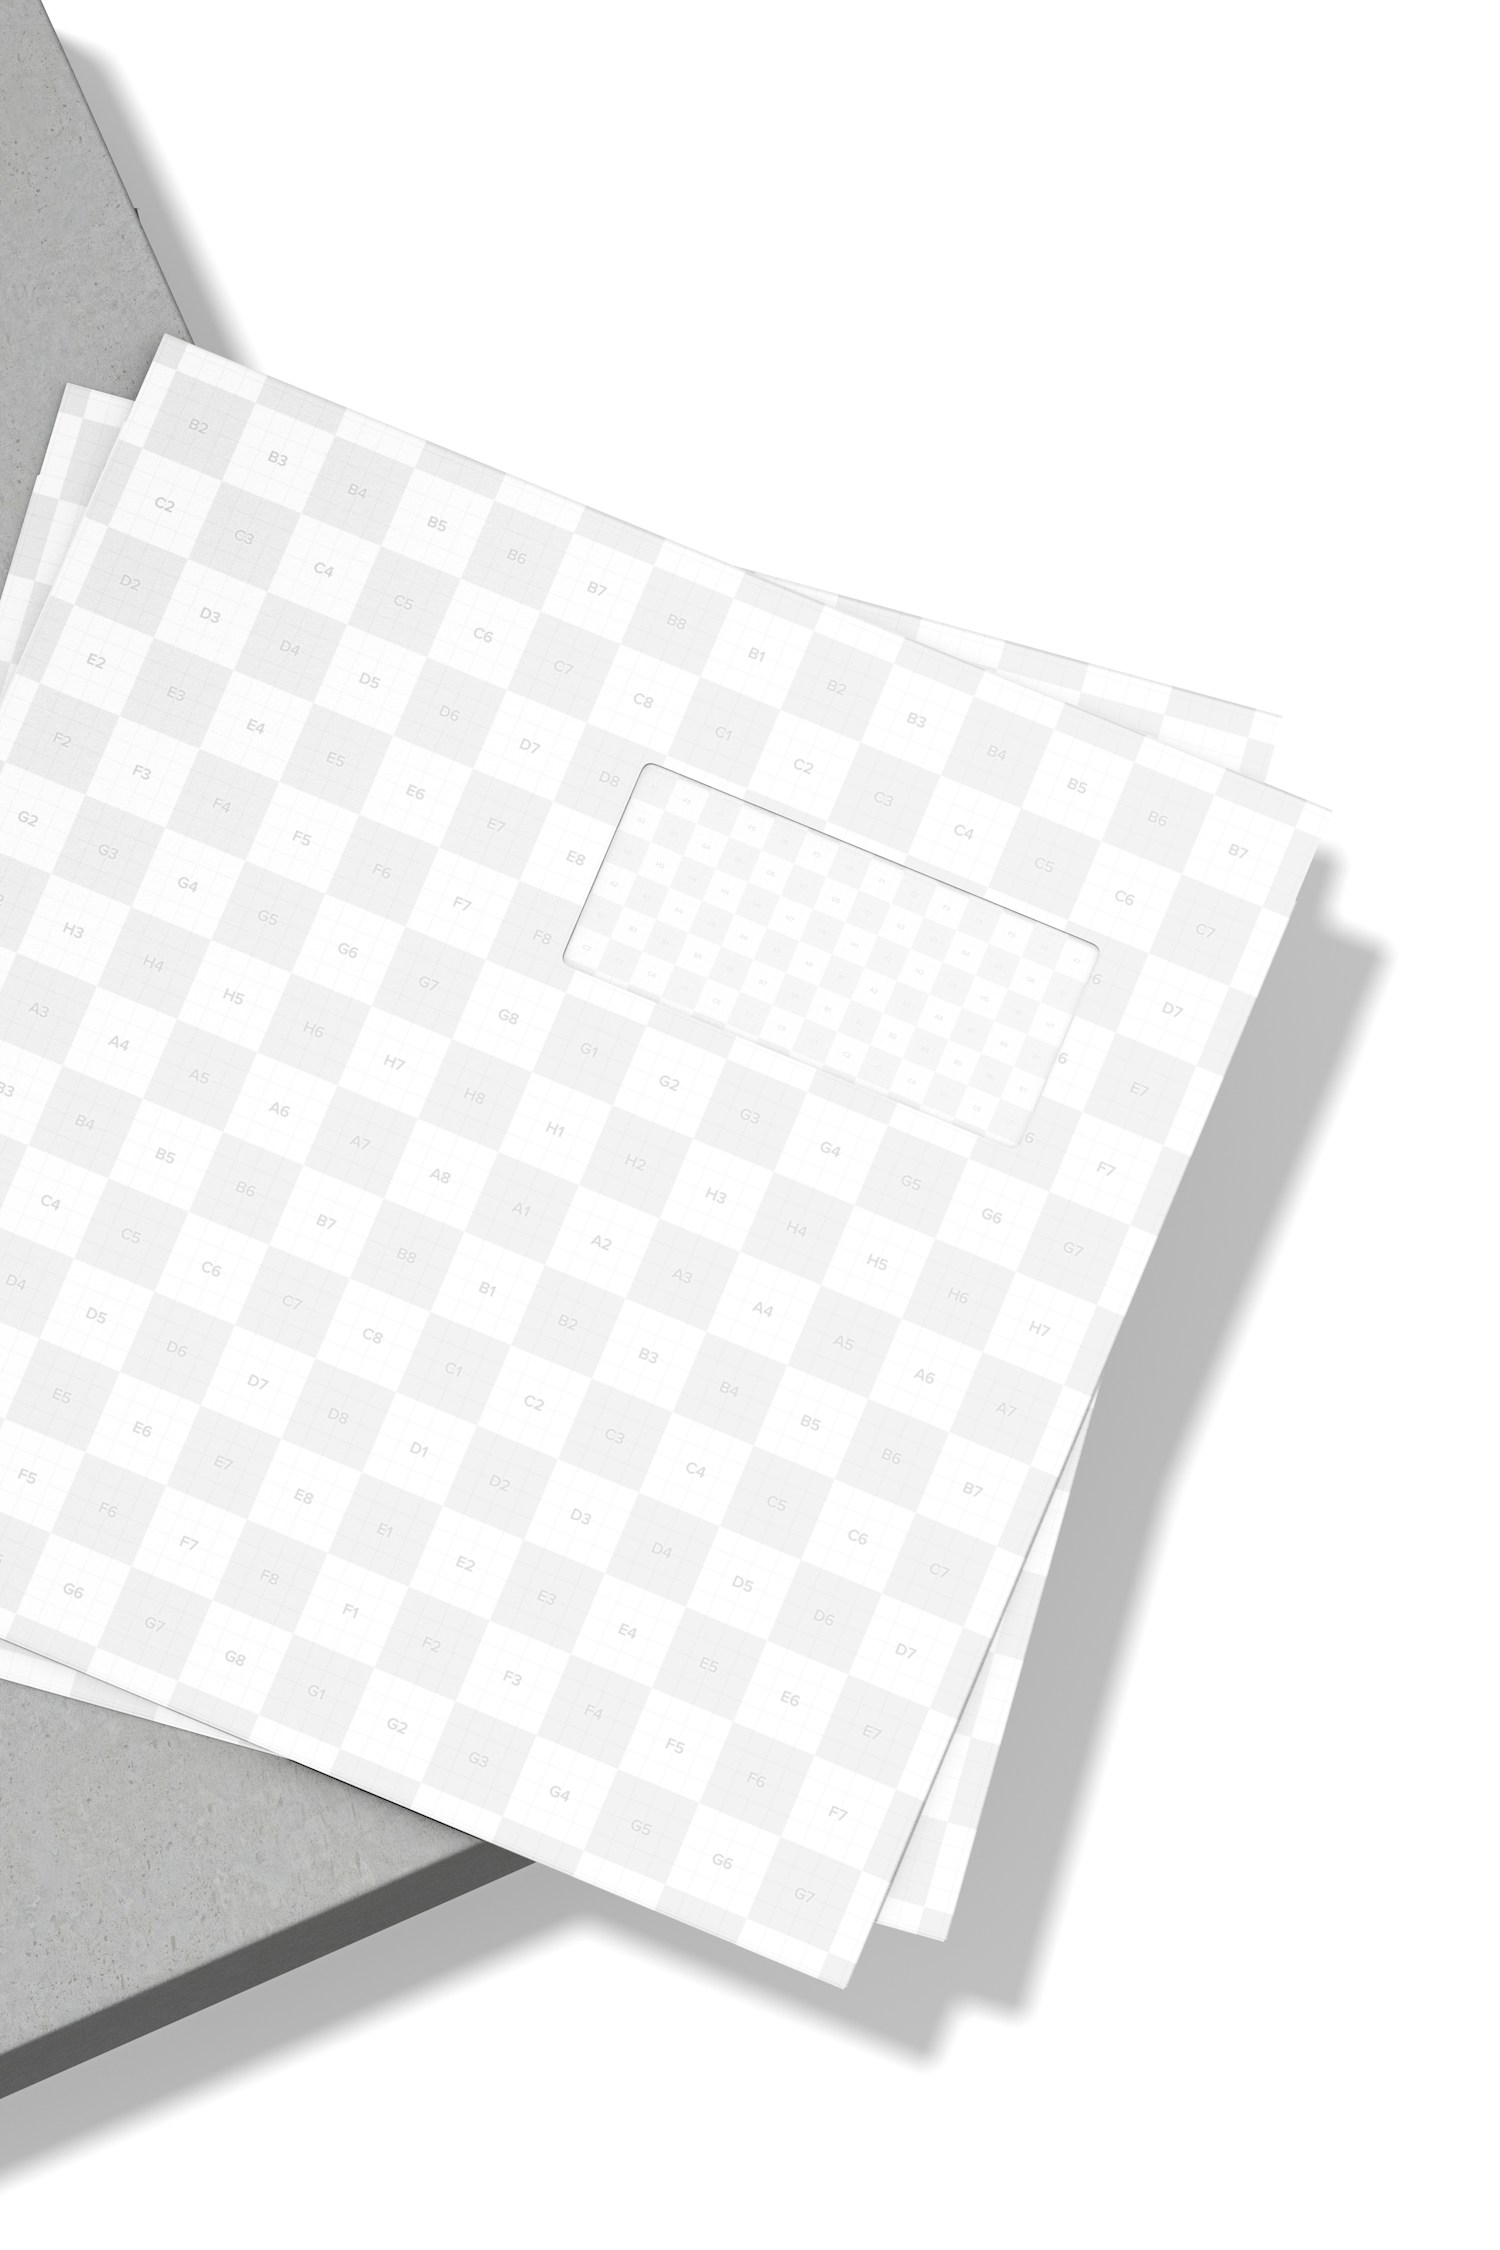 Square Envelope with Window Mockup